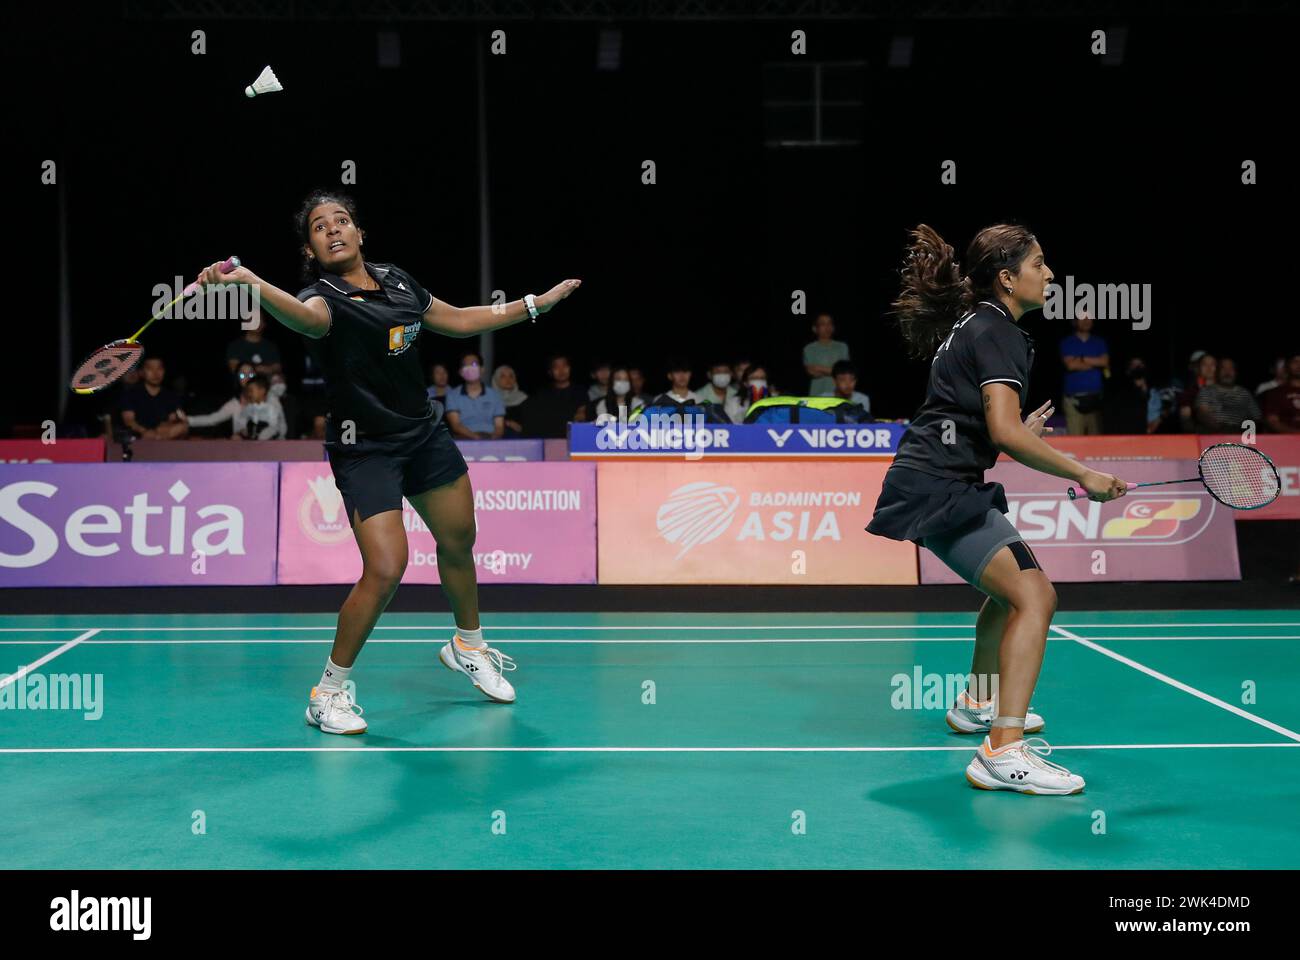 Kuala Lumpur, Malaysia. 18th Feb, 2024. Gayatri Gopichand Pullela and Treesa Jolly (L) of India in action against Jongkolphan Kititharakul and Rawinda Projongjai of Thailand (not pictured) during the Women's Doubles final match at the Badminton Asia Team Championships 2024 at Setia City Convention Centre in Shah Alam. Gayatri Gopichand Pullela and Treesa Jolly won with scores; 21/18/21 : 16/21/16. Credit: SOPA Images Limited/Alamy Live News Stock Photo